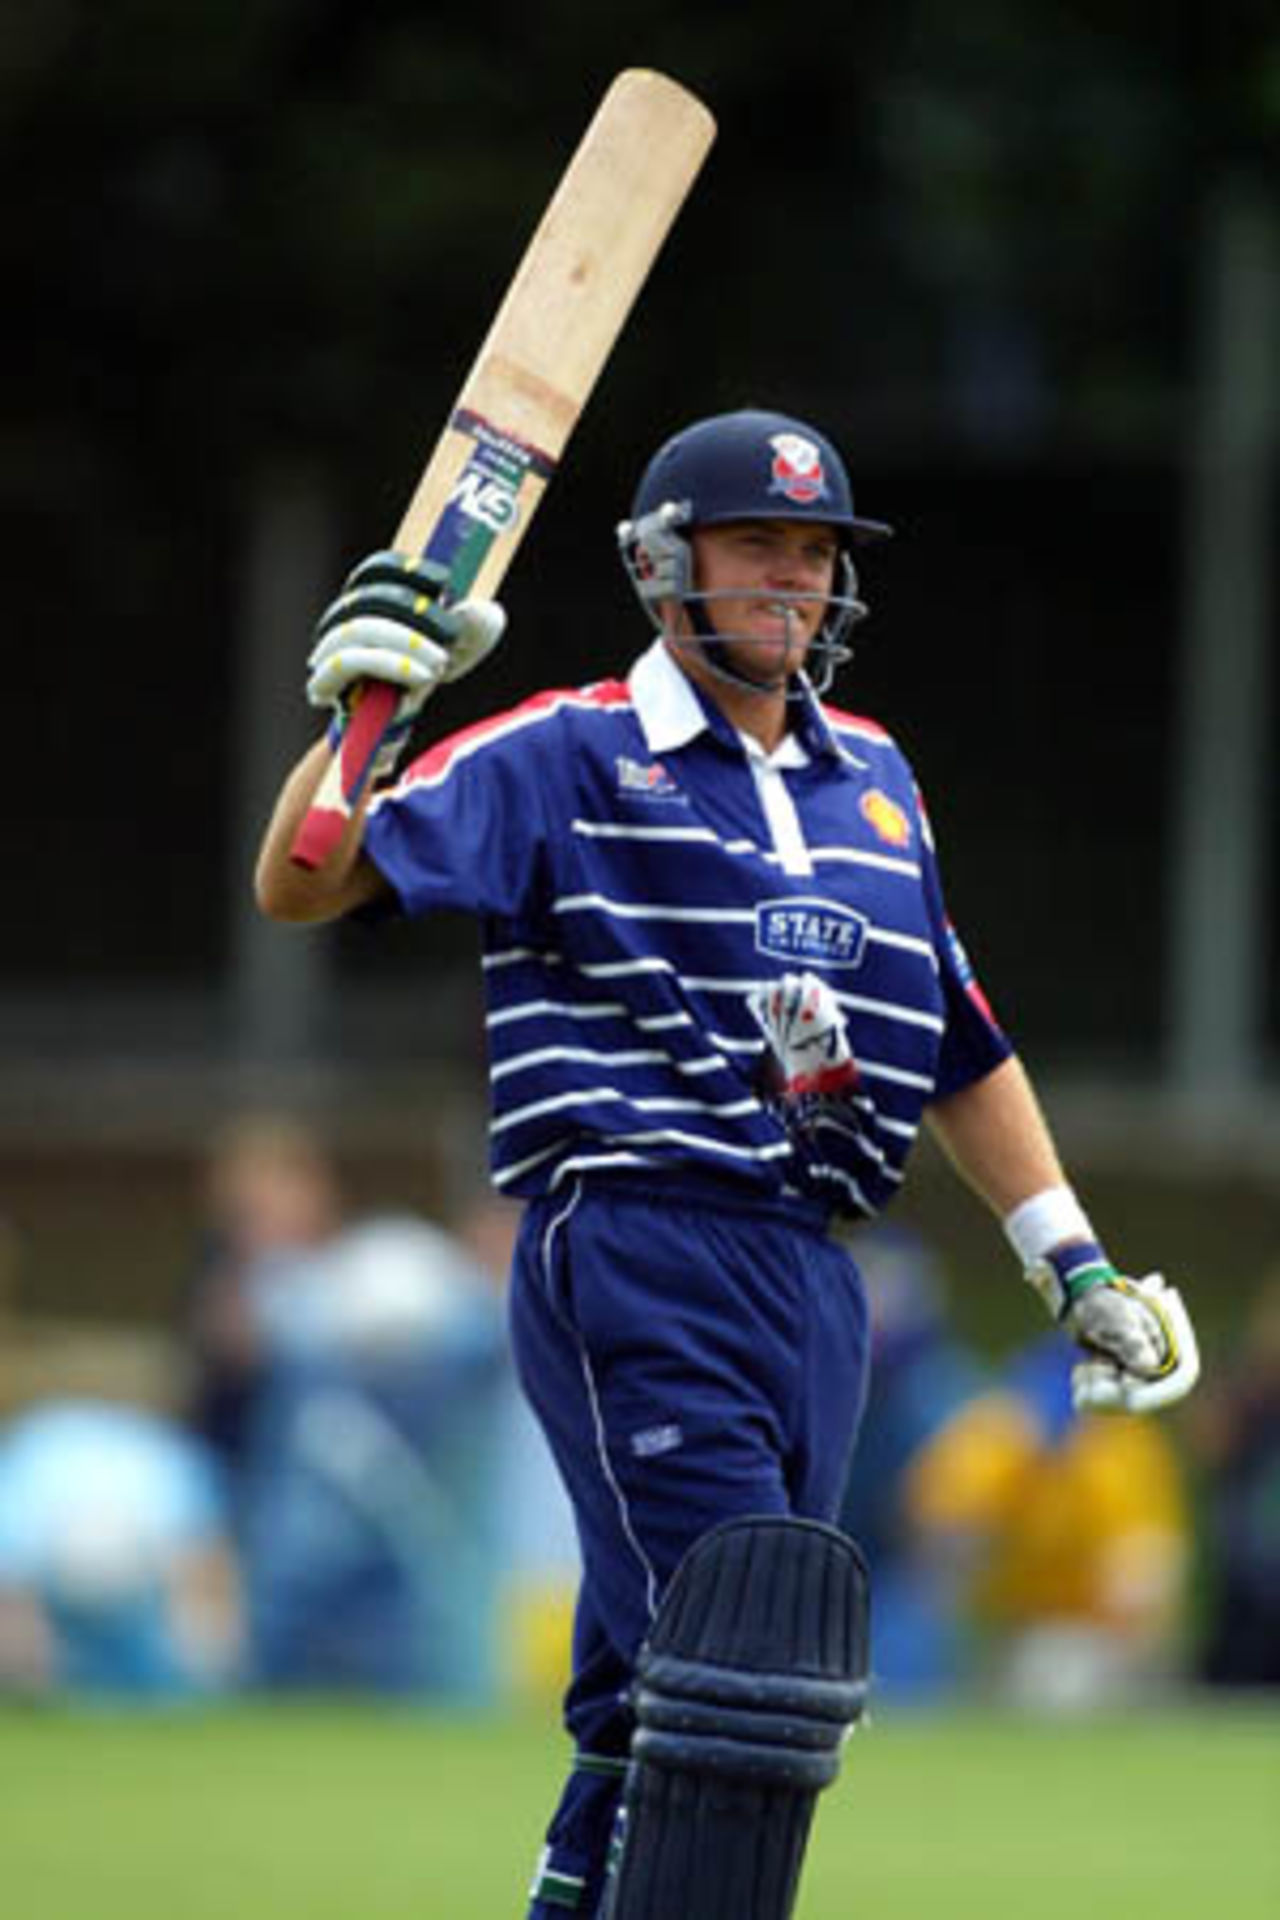 Auckland batsman Lou Vincent raises his bat to the crowd upon reaching his second Shell Cup century, before going on to make an unbeaten 133, Shell Cup: Auckland v Northern Districts at Eden Park Outer Oval, Auckland, 18 January 2001